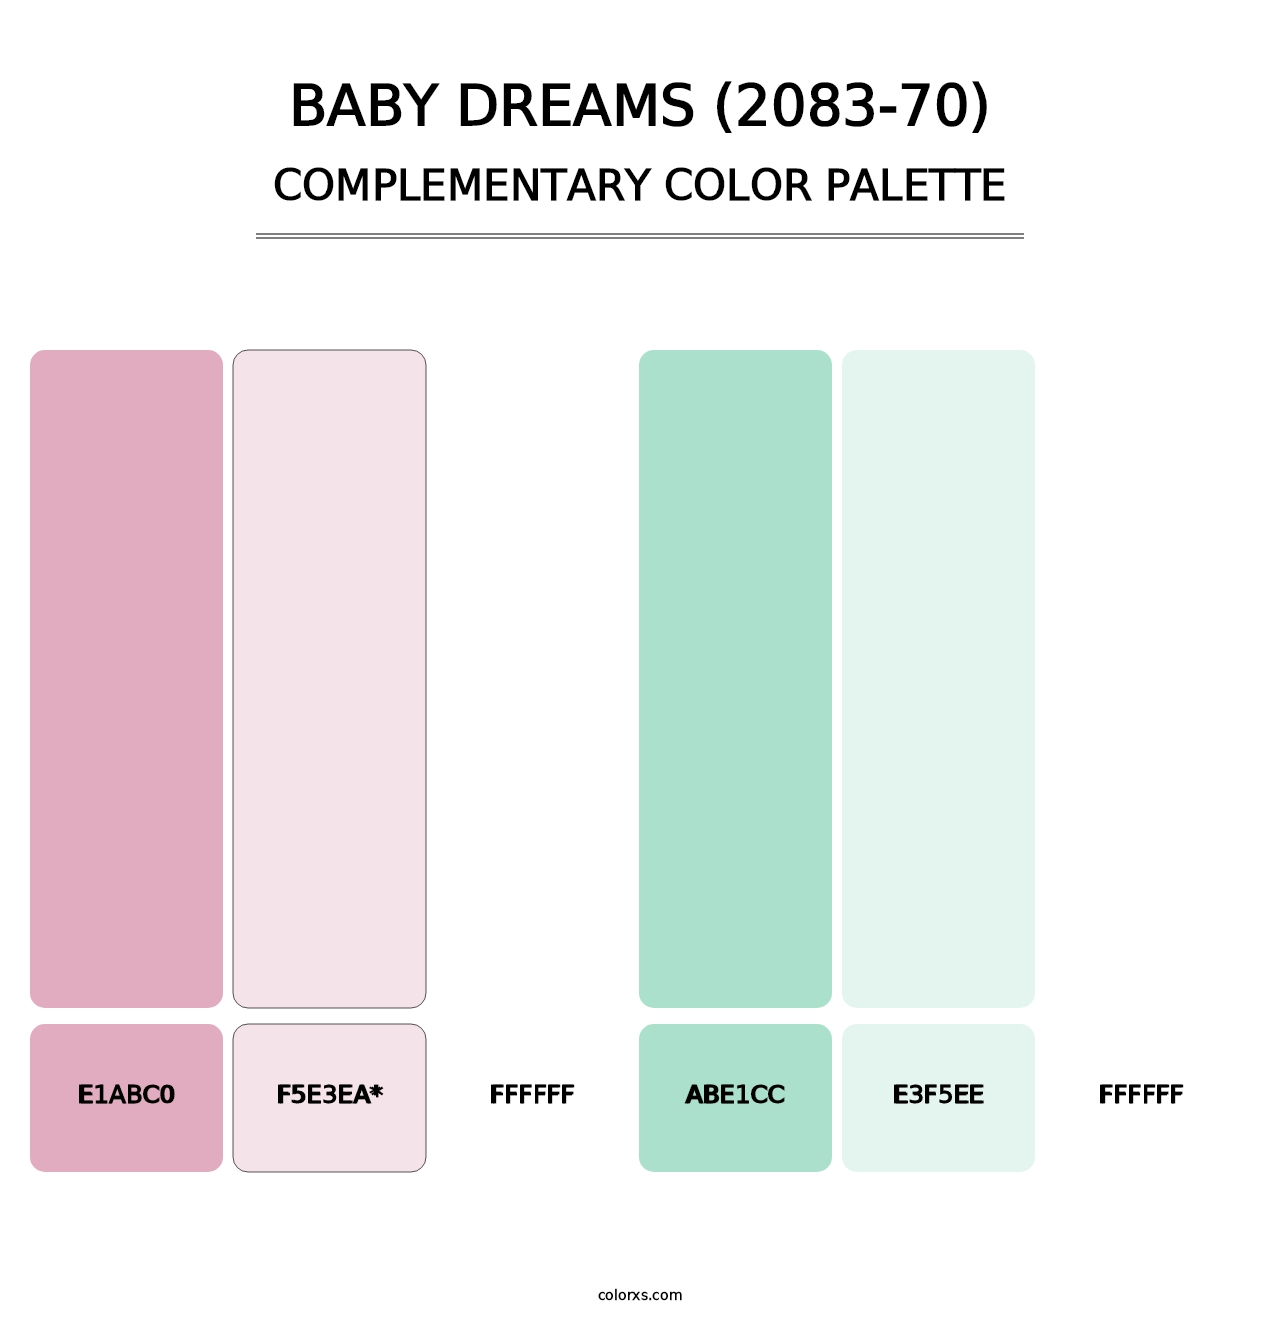 Baby Dreams (2083-70) - Complementary Color Palette